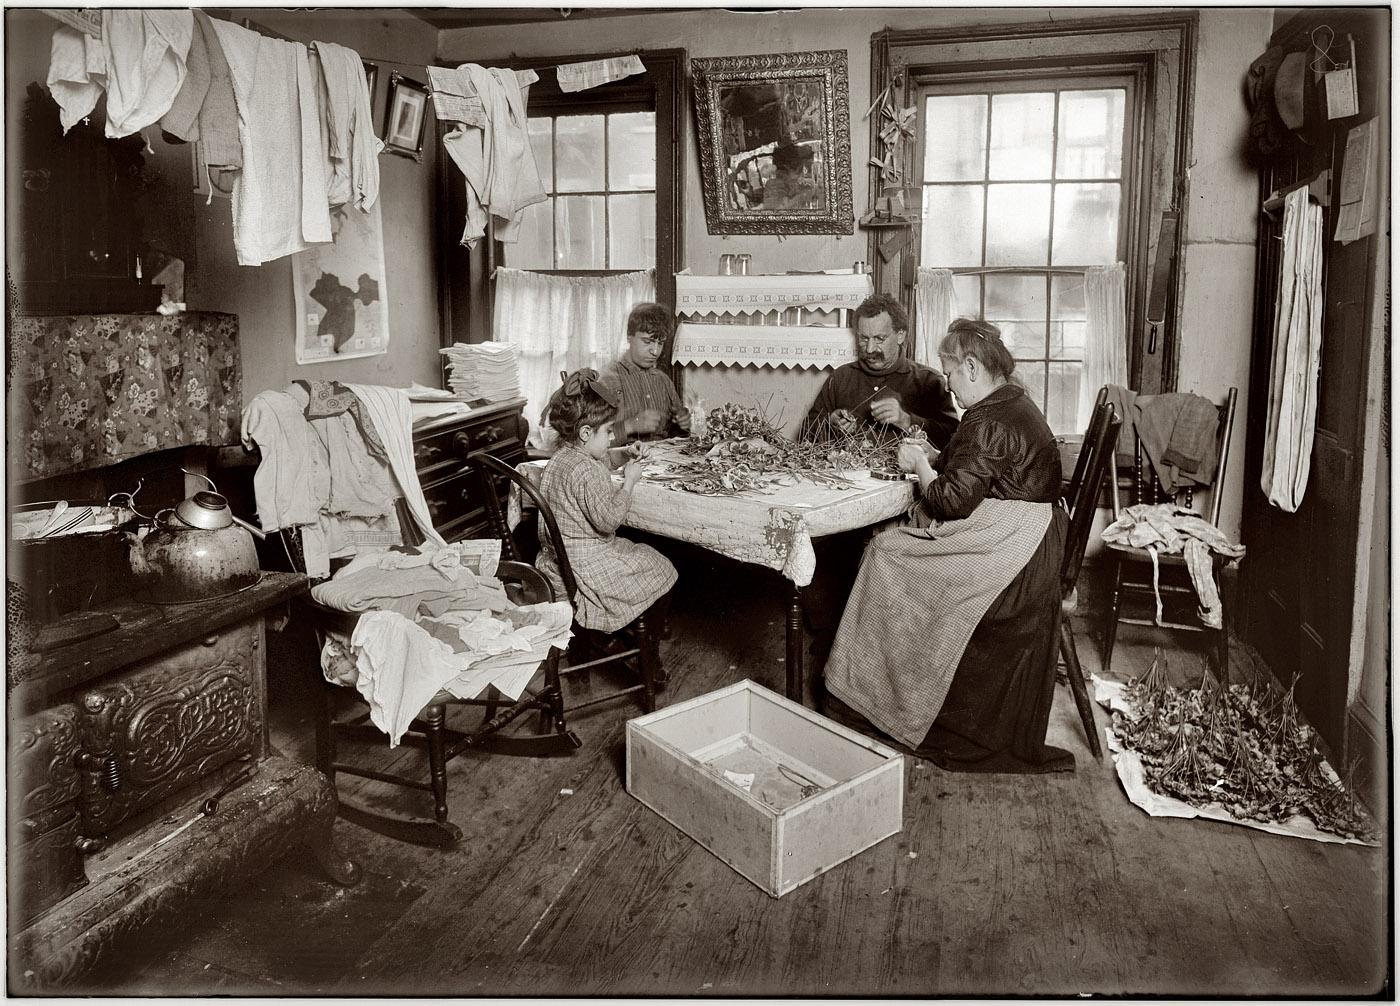 January 1912, New York City. View full size. To the untrained observer this might be a pleasant domestic scene; to the eye (and lens) of social reformer Lewis Hine, however, it is a diorama of decadence and moral decay, with peril lurking in every detail. The object of his ire here is the use of child labor in tenement home work, specifically the assembly of artificial flowers: "Julin, a 6-year-old child, making pansies for her neighbors on top floor (Gatto), 106 Thompson St. They said she does this every day, 'but not all day.' A growler and dirty beer glasses in the window, unwashed dishes on the stove, clothes everywhere, and flowers likewise." Photo and caption by Lewis Wickes Hine. (NB: Growler = beer pitcher.)